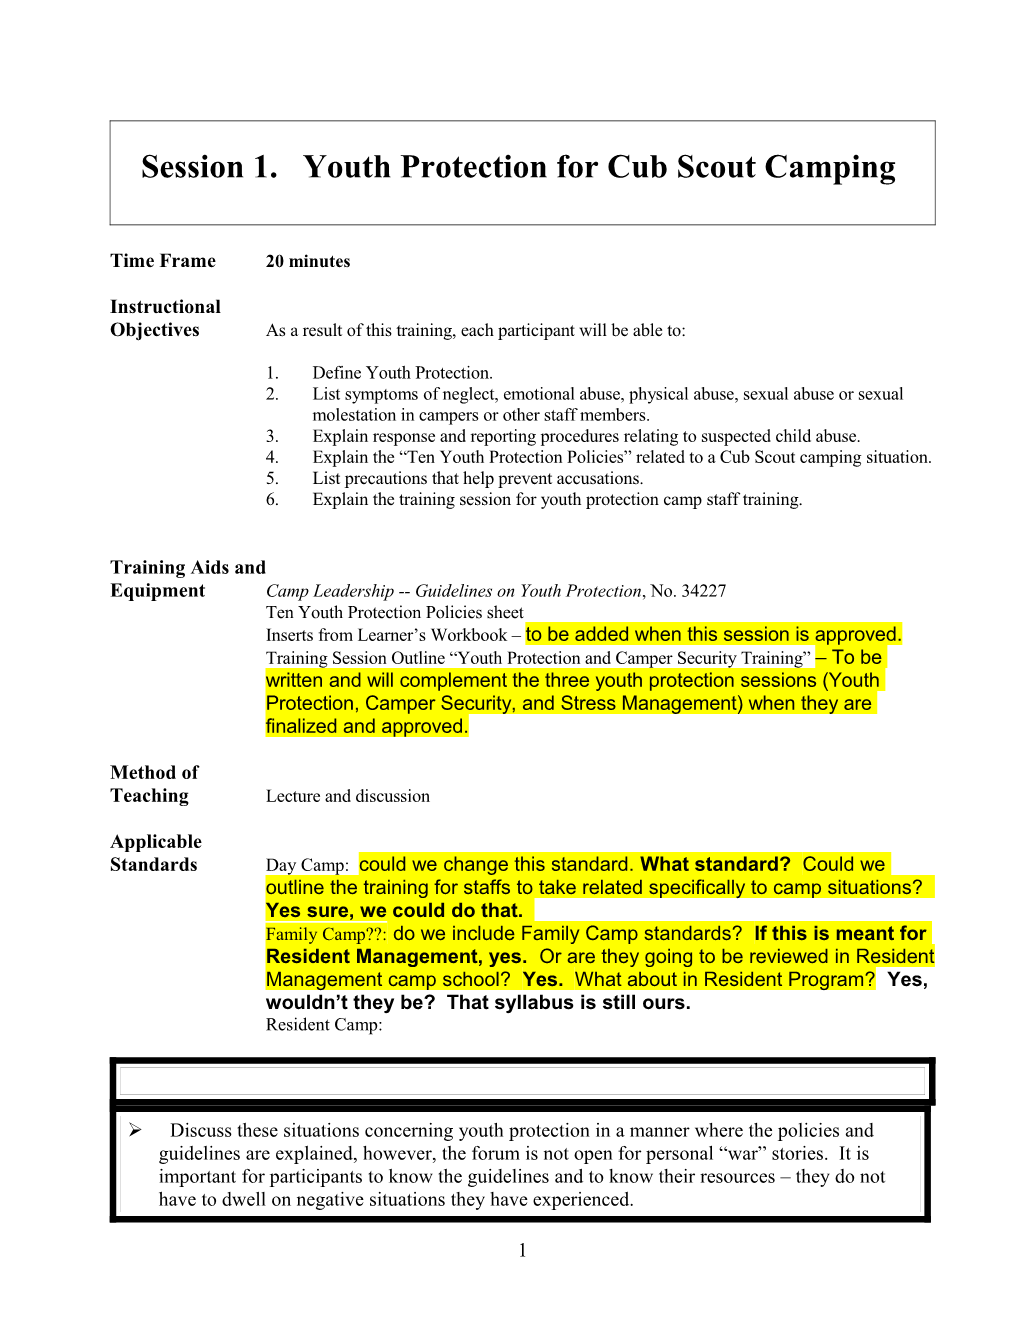 Session 1. Youth Protection for Cub Scout Camping